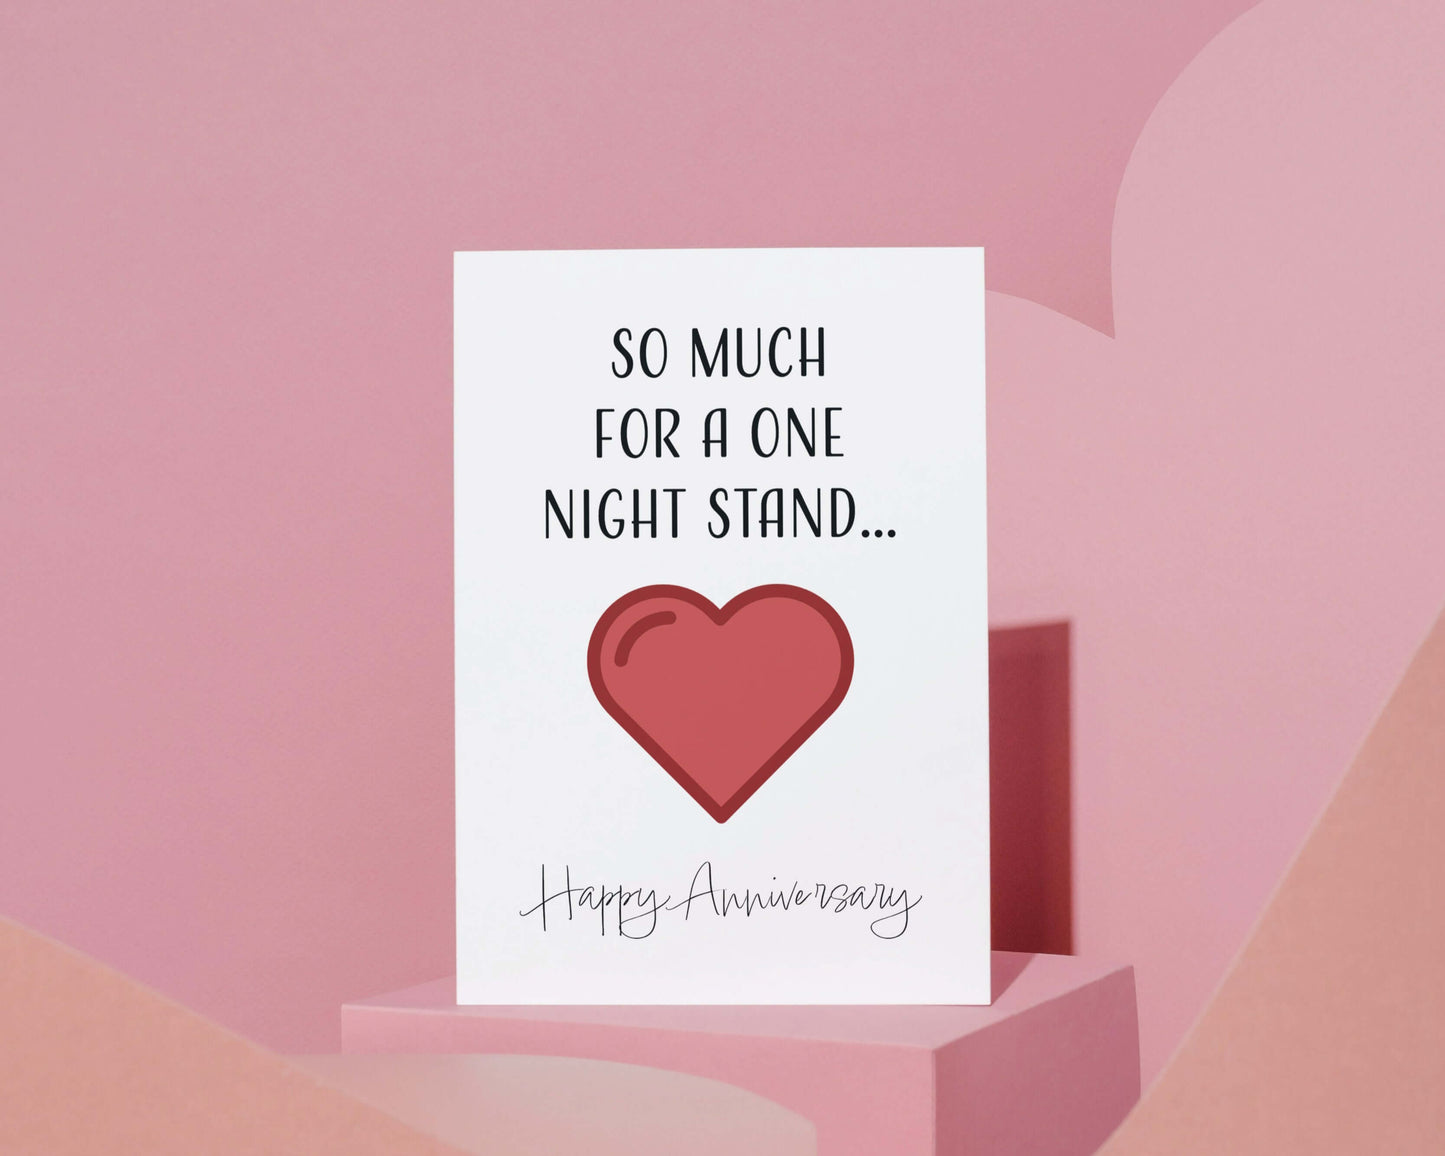 The Card Store UK's So Much For a One Night Stand | Funny Anniversary Card | Funny Rude Wedding Relationship Anniversary Greeting Card, Anniversary Cards for £3.50 each